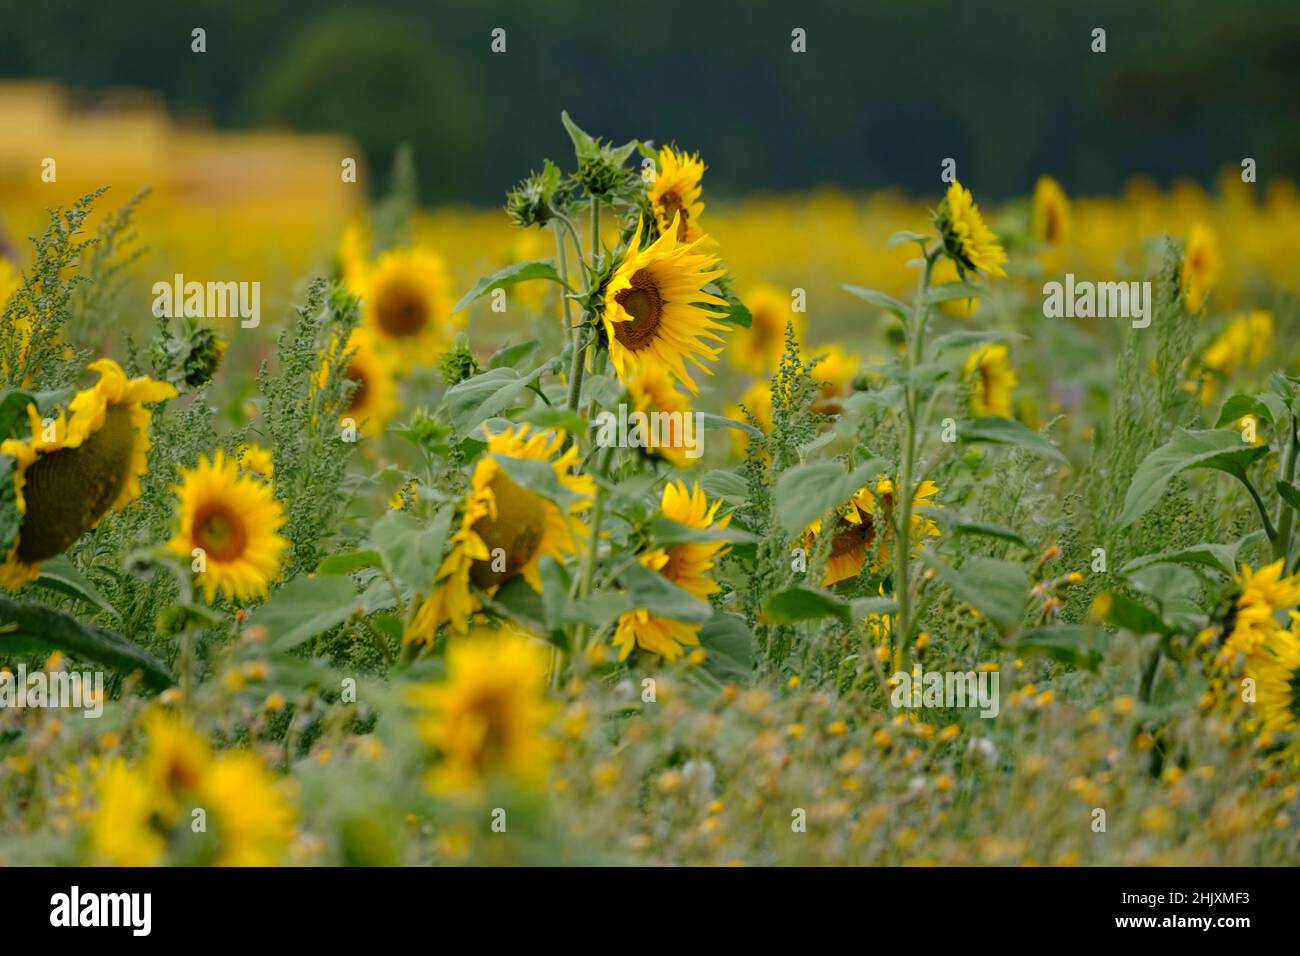 Sunflowers are usually tall annual or perennial plants that in some species can grow to a height of 300 cm (120 in) or more. They bear one or more wid Stock Photo